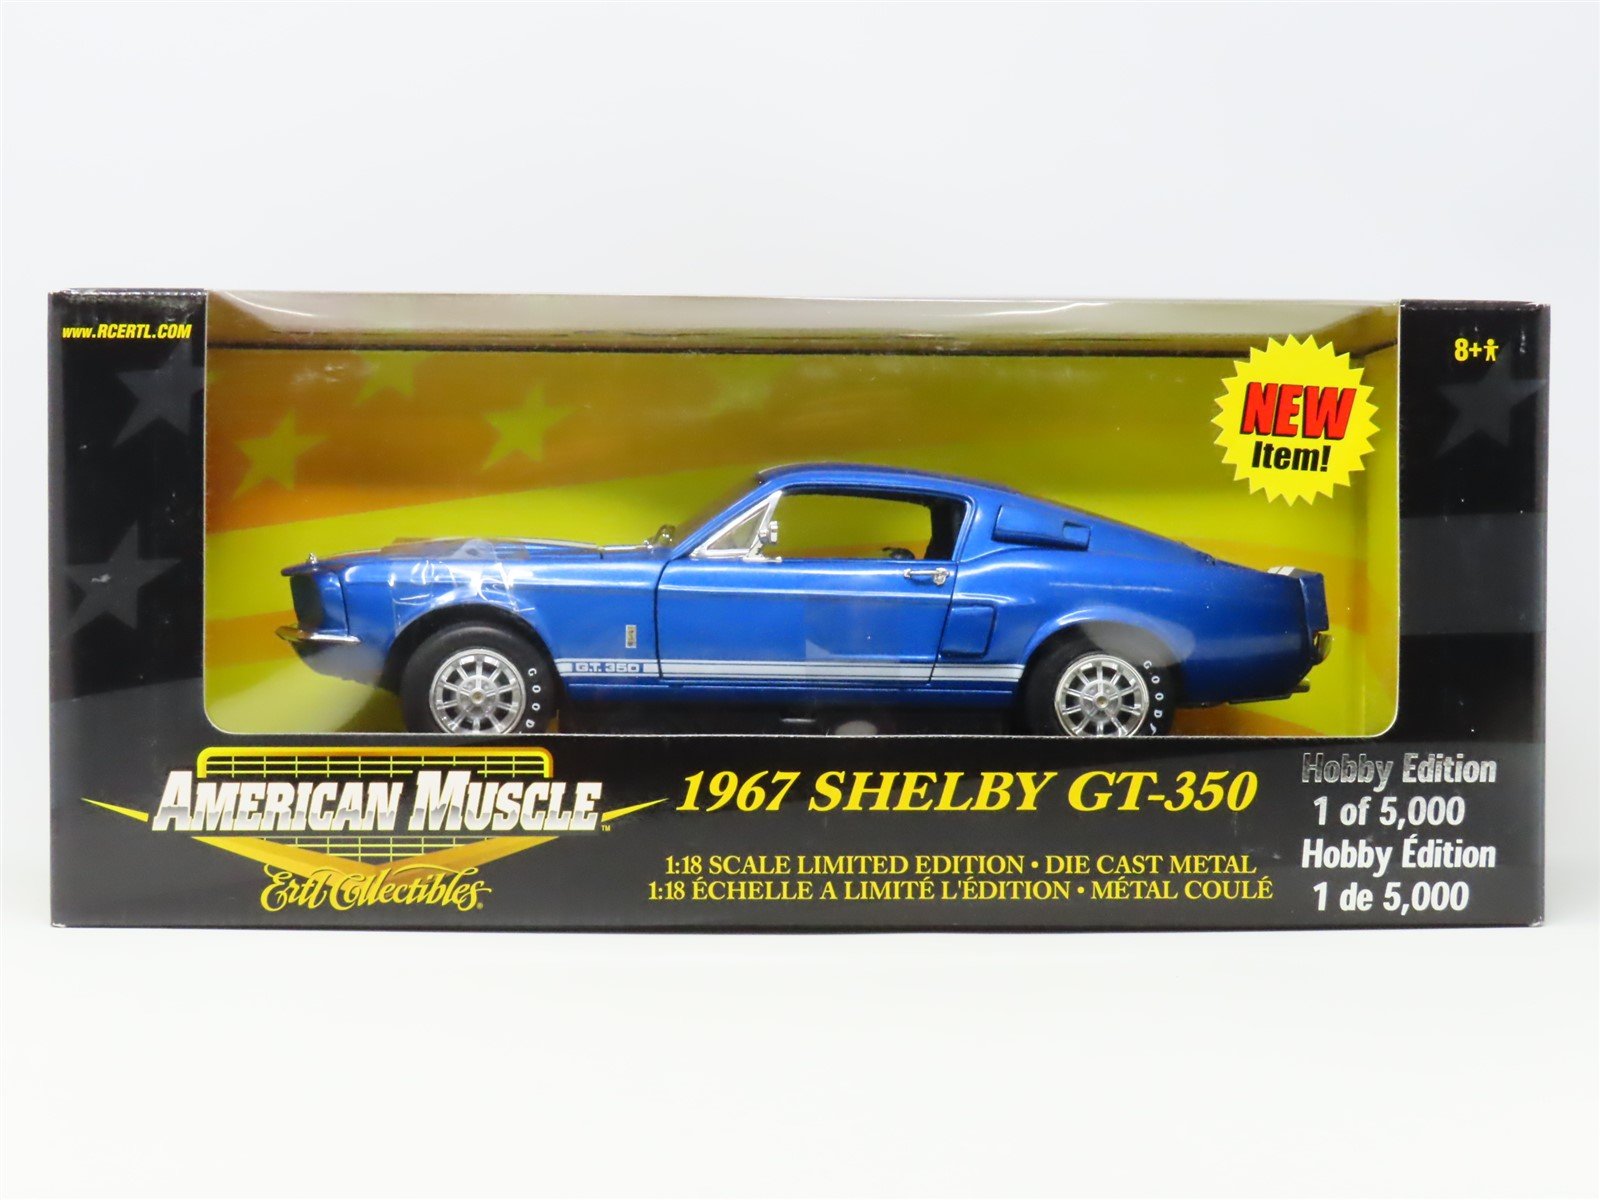 1:18 ERTL American Muscle 33275 1967 Shelby GT-350 Hobby Edition 1 of 5,000